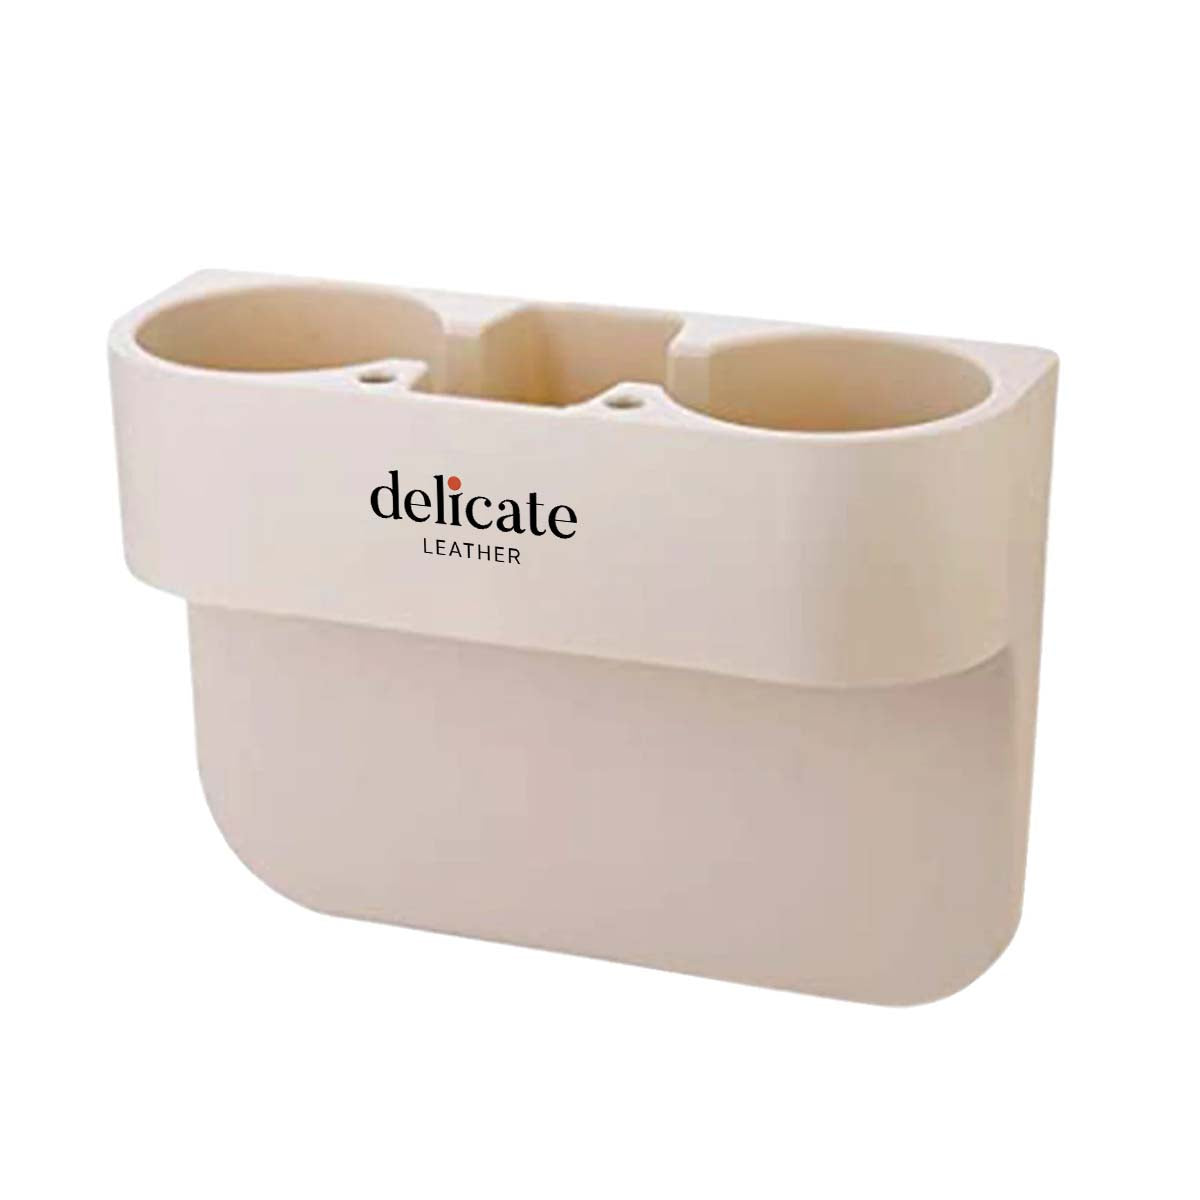 Delicate Leather Cup Holder Portable Multifunction Vehicle Seat Cup Cell Phone Drinks Holder Box Car Interior Organizer, Custom For Your Cars, Car Accessories LM11995